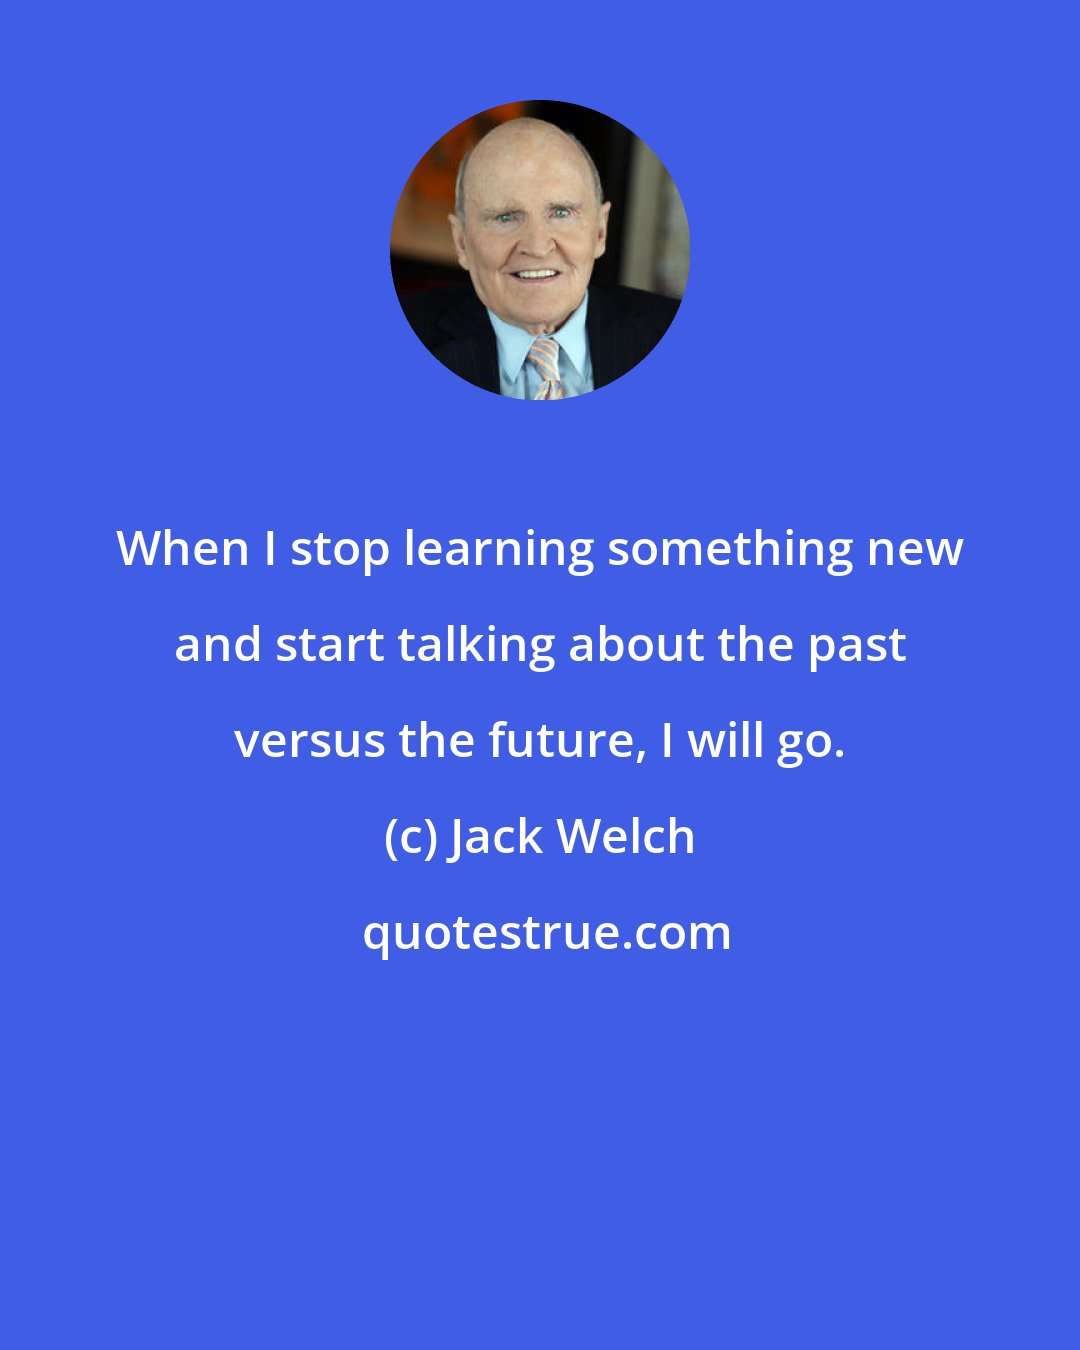 Jack Welch: When I stop learning something new and start talking about the past versus the future, I will go.